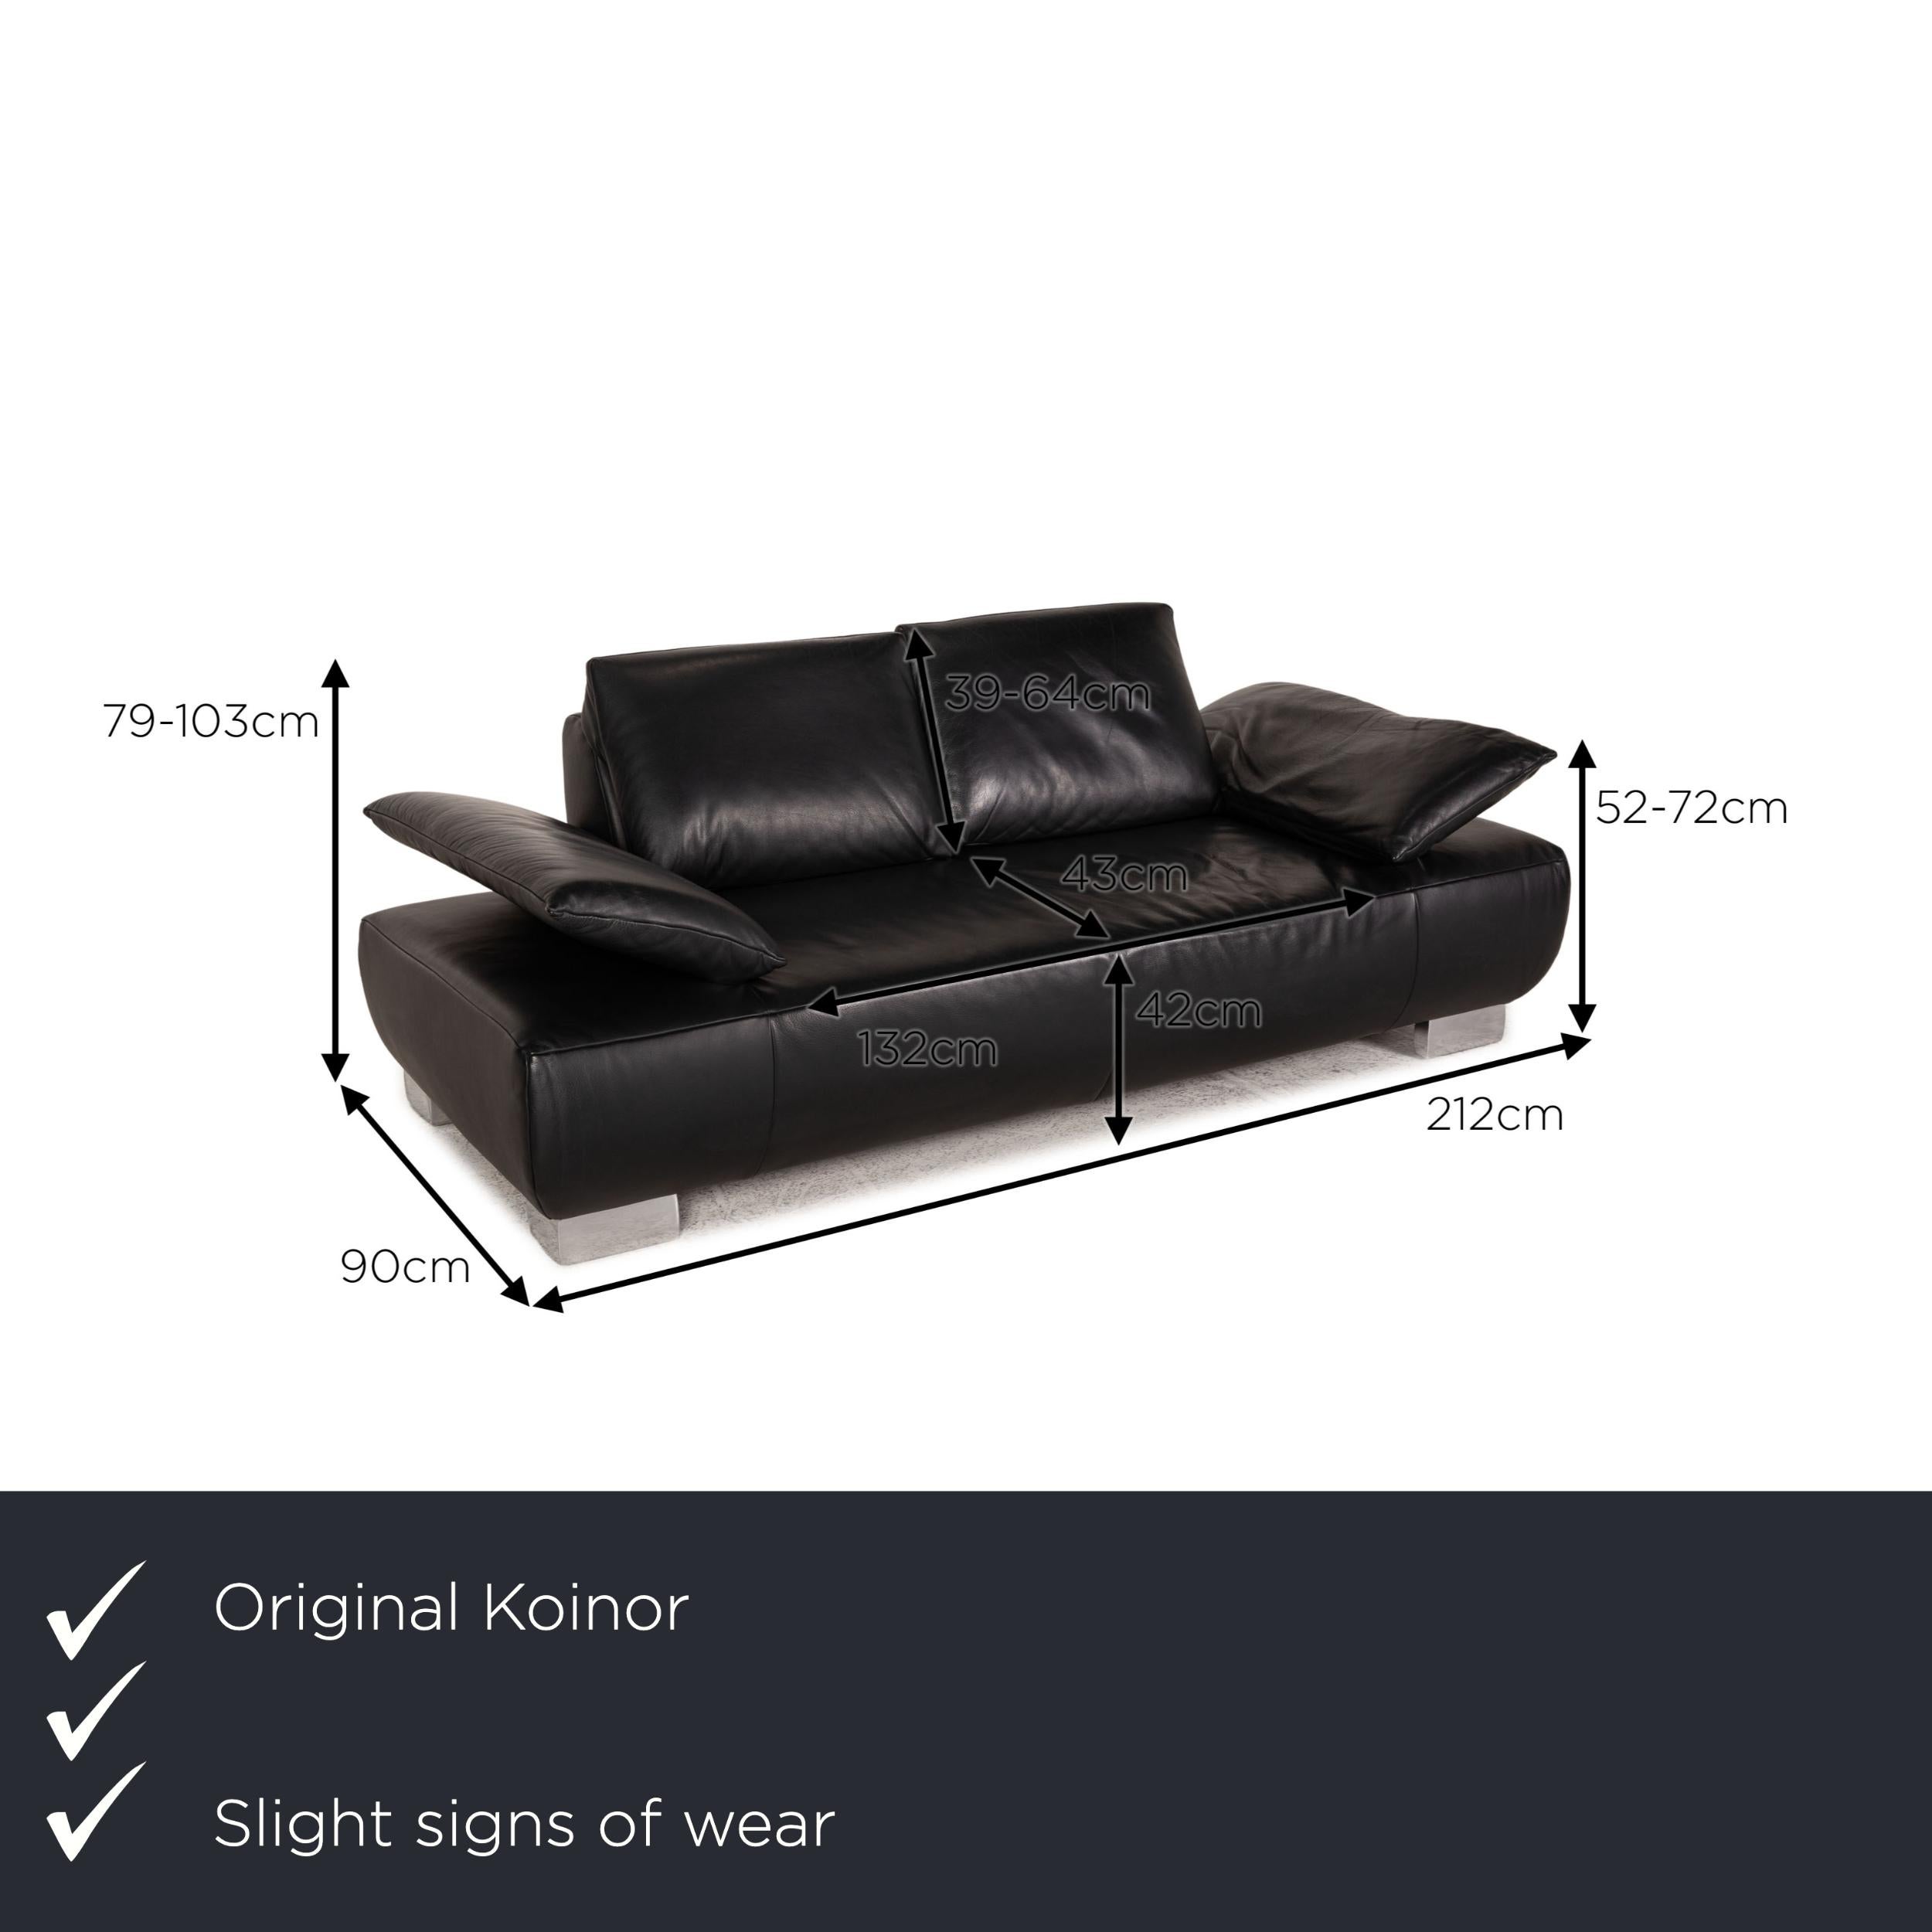 We present to you a Koinor Volare leather sofa black two seater couch function.

Product measurements in centimeters:

depth: 90
width: 200
height: 79
seat height: 43
rest height: 52
seat depth: 56
seat width: 117
back height: 35.

 